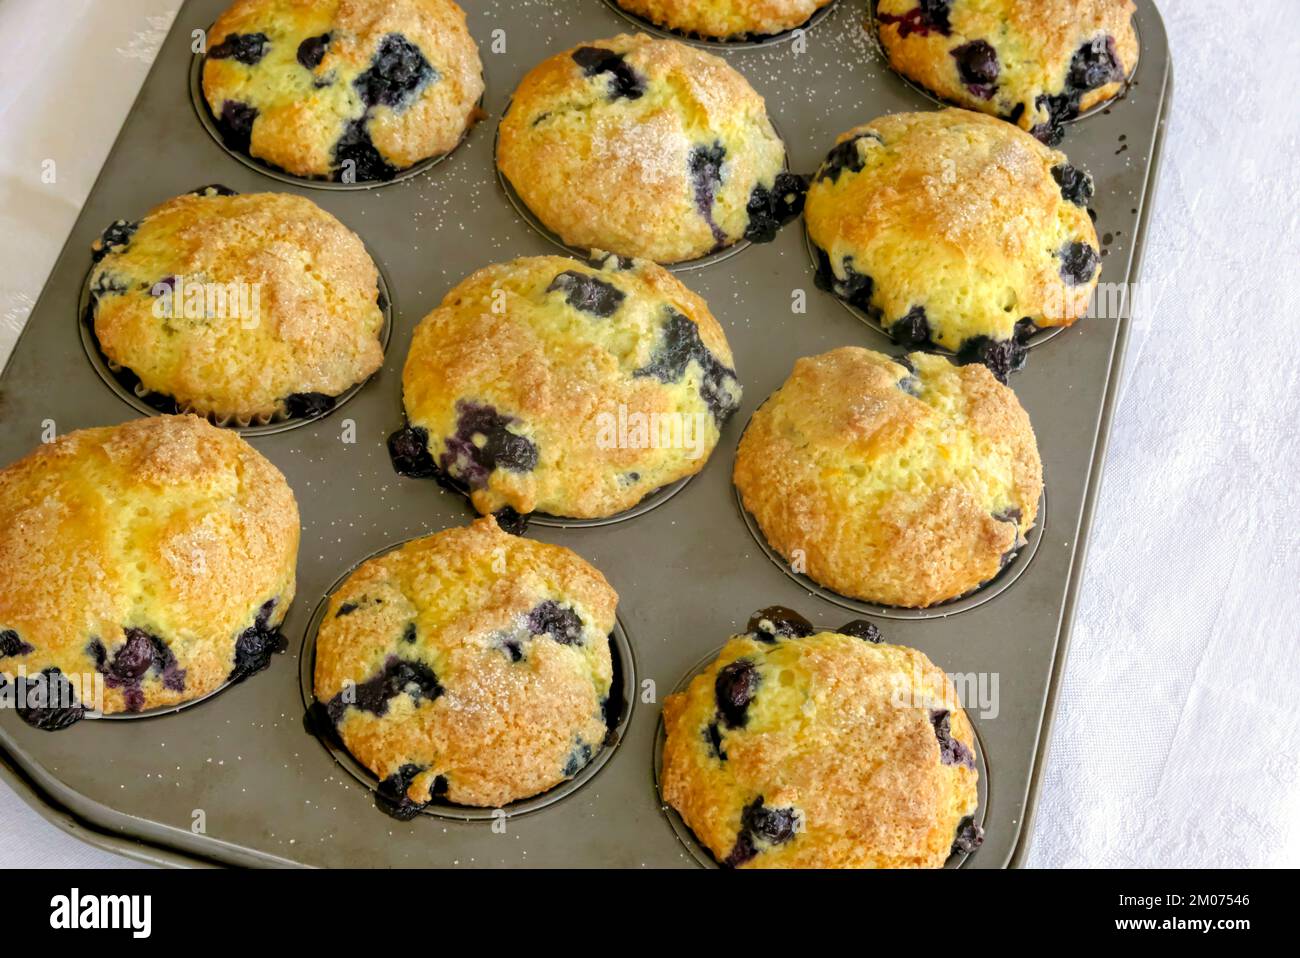 Freshly baked homemade Blueberry Orange Muffins in a muffin tin. Stock Photo